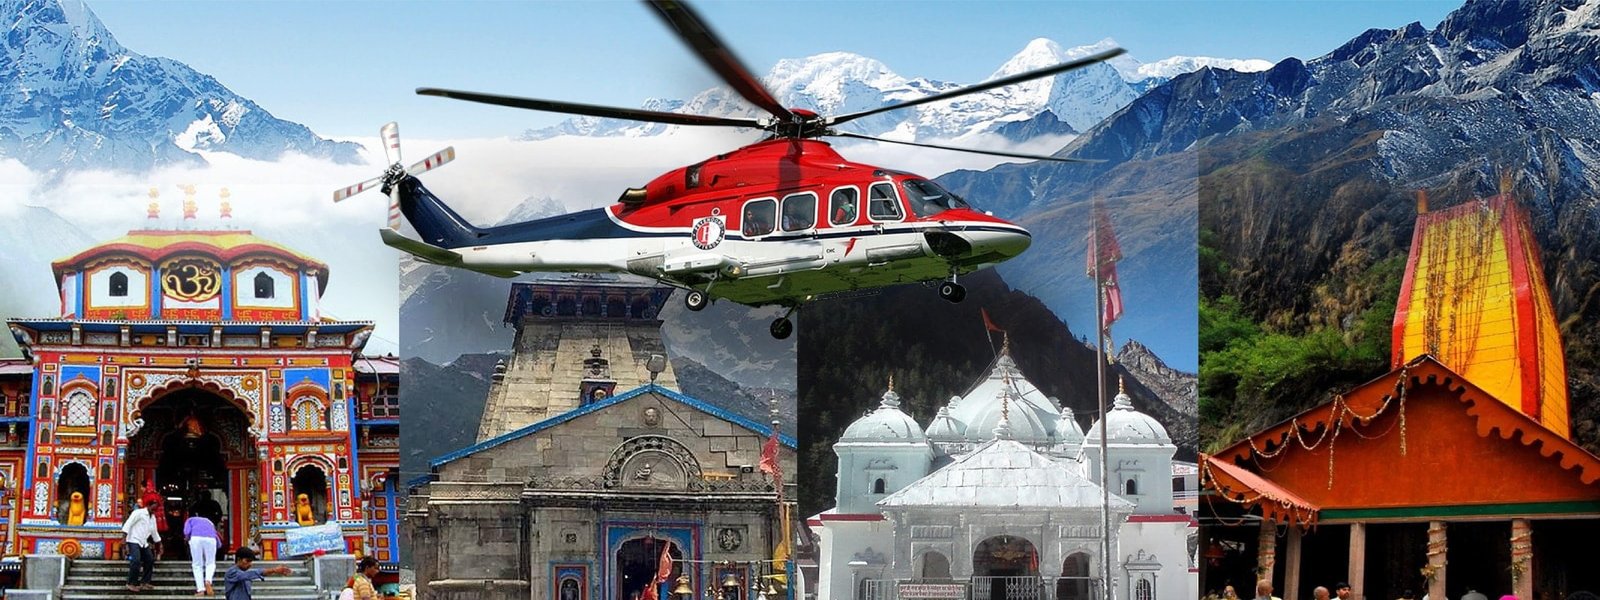 Spiritual Chardham Travel - Embark on a soulful adventure with The Chardham